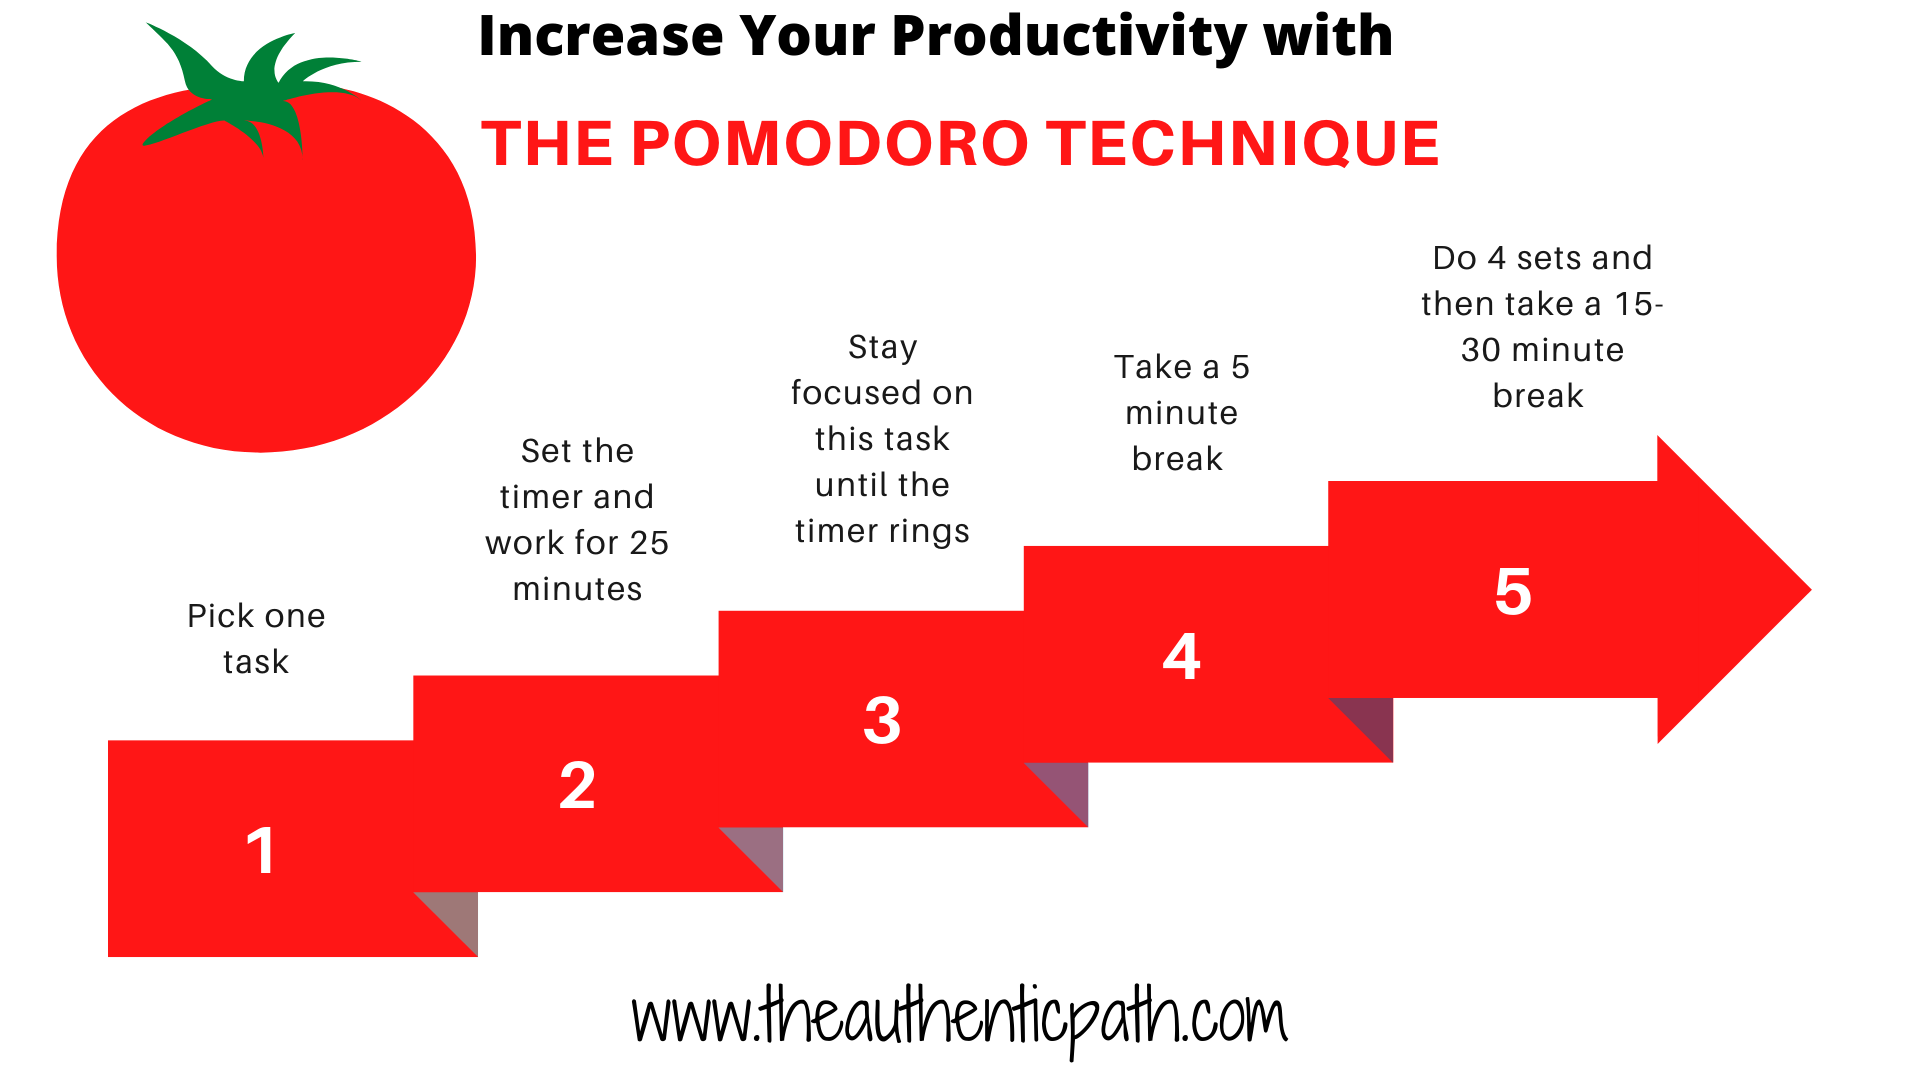  A tomato-themed infographic of the Pomodoro Technique time management method, with 5 steps: pick a task, set a timer for 25 minutes, work on the task until the timer rings, take a 5-minute break, and repeat four times, then take a longer break.